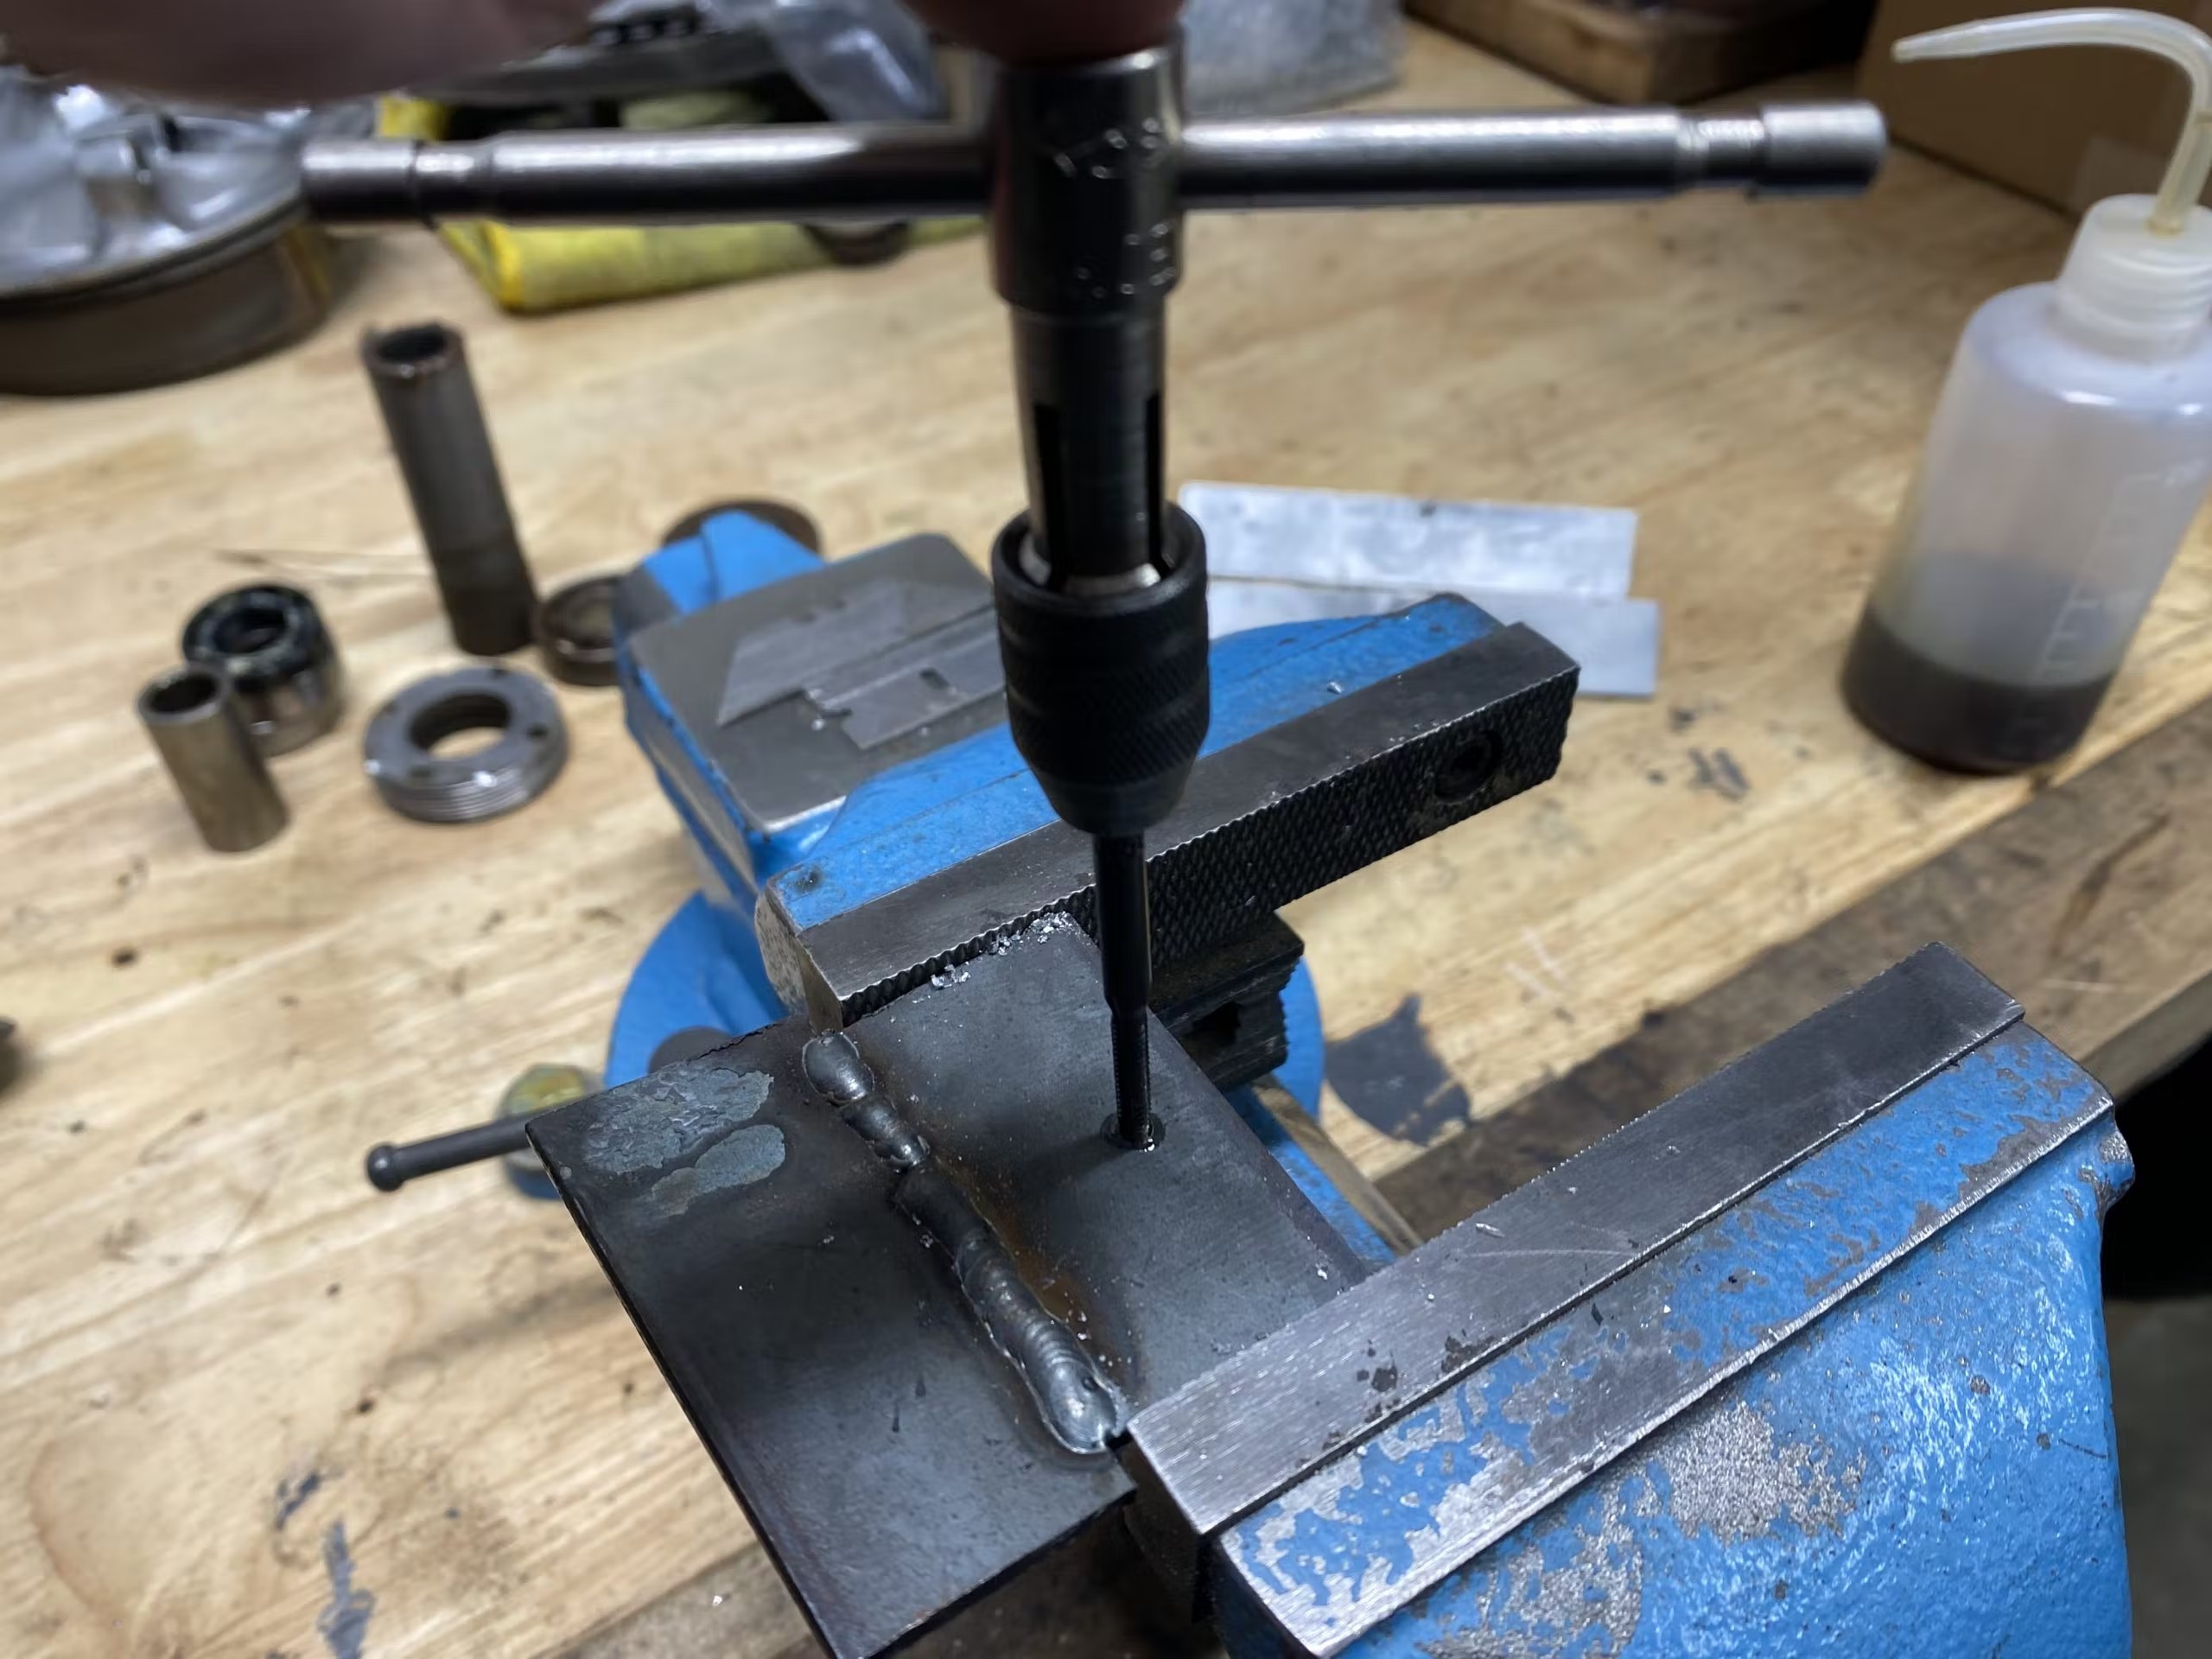 Drilling holes for threads